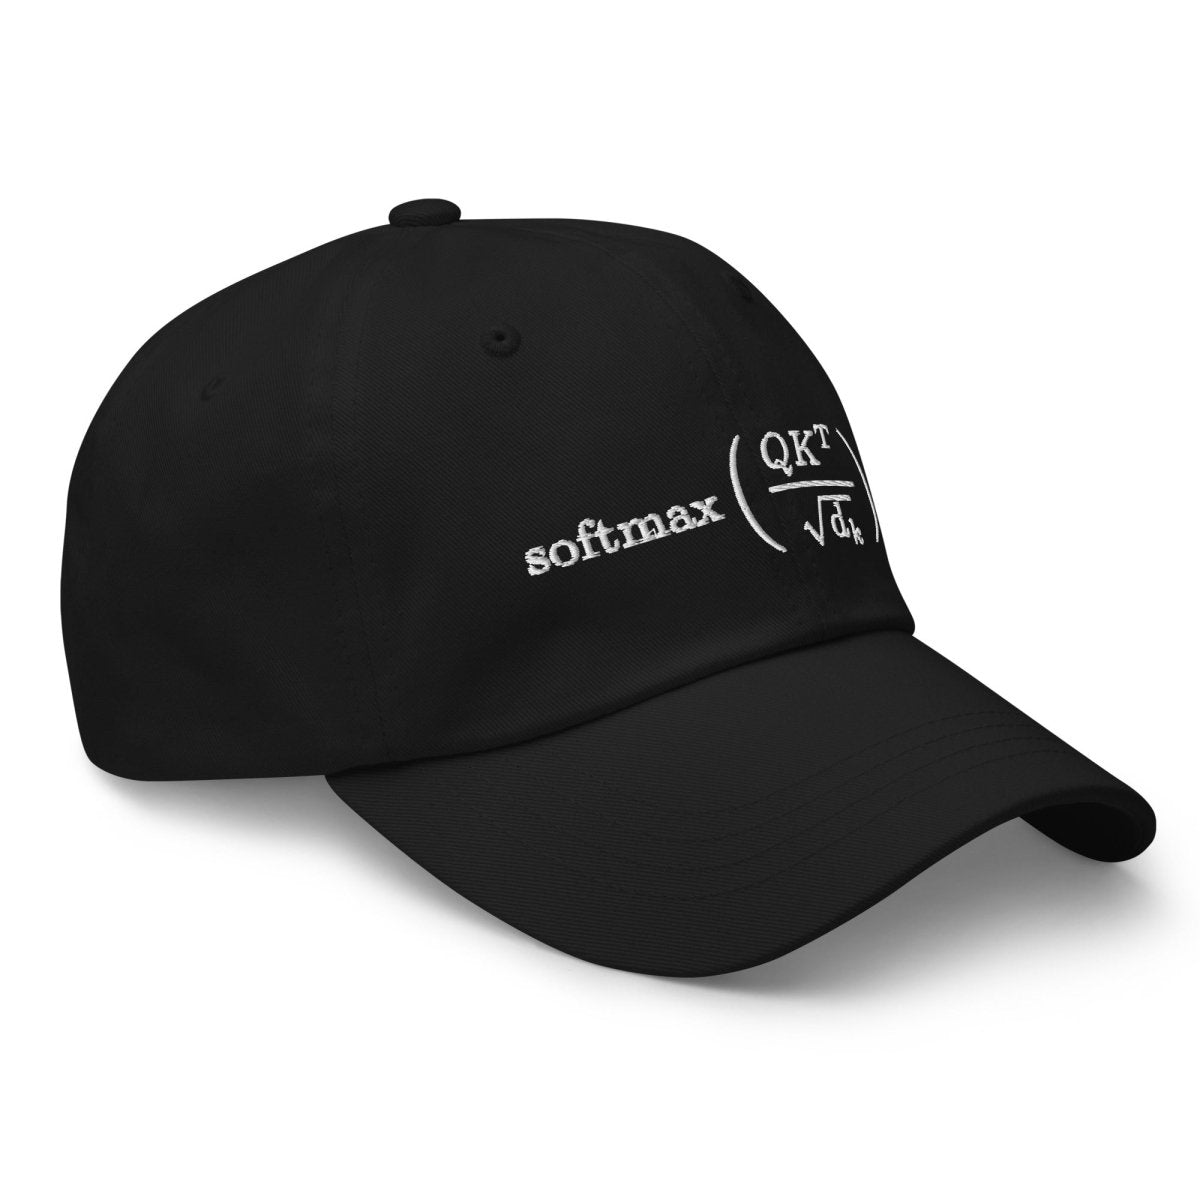 Attention is All You Need Embroidered Cap - Black - AI Store